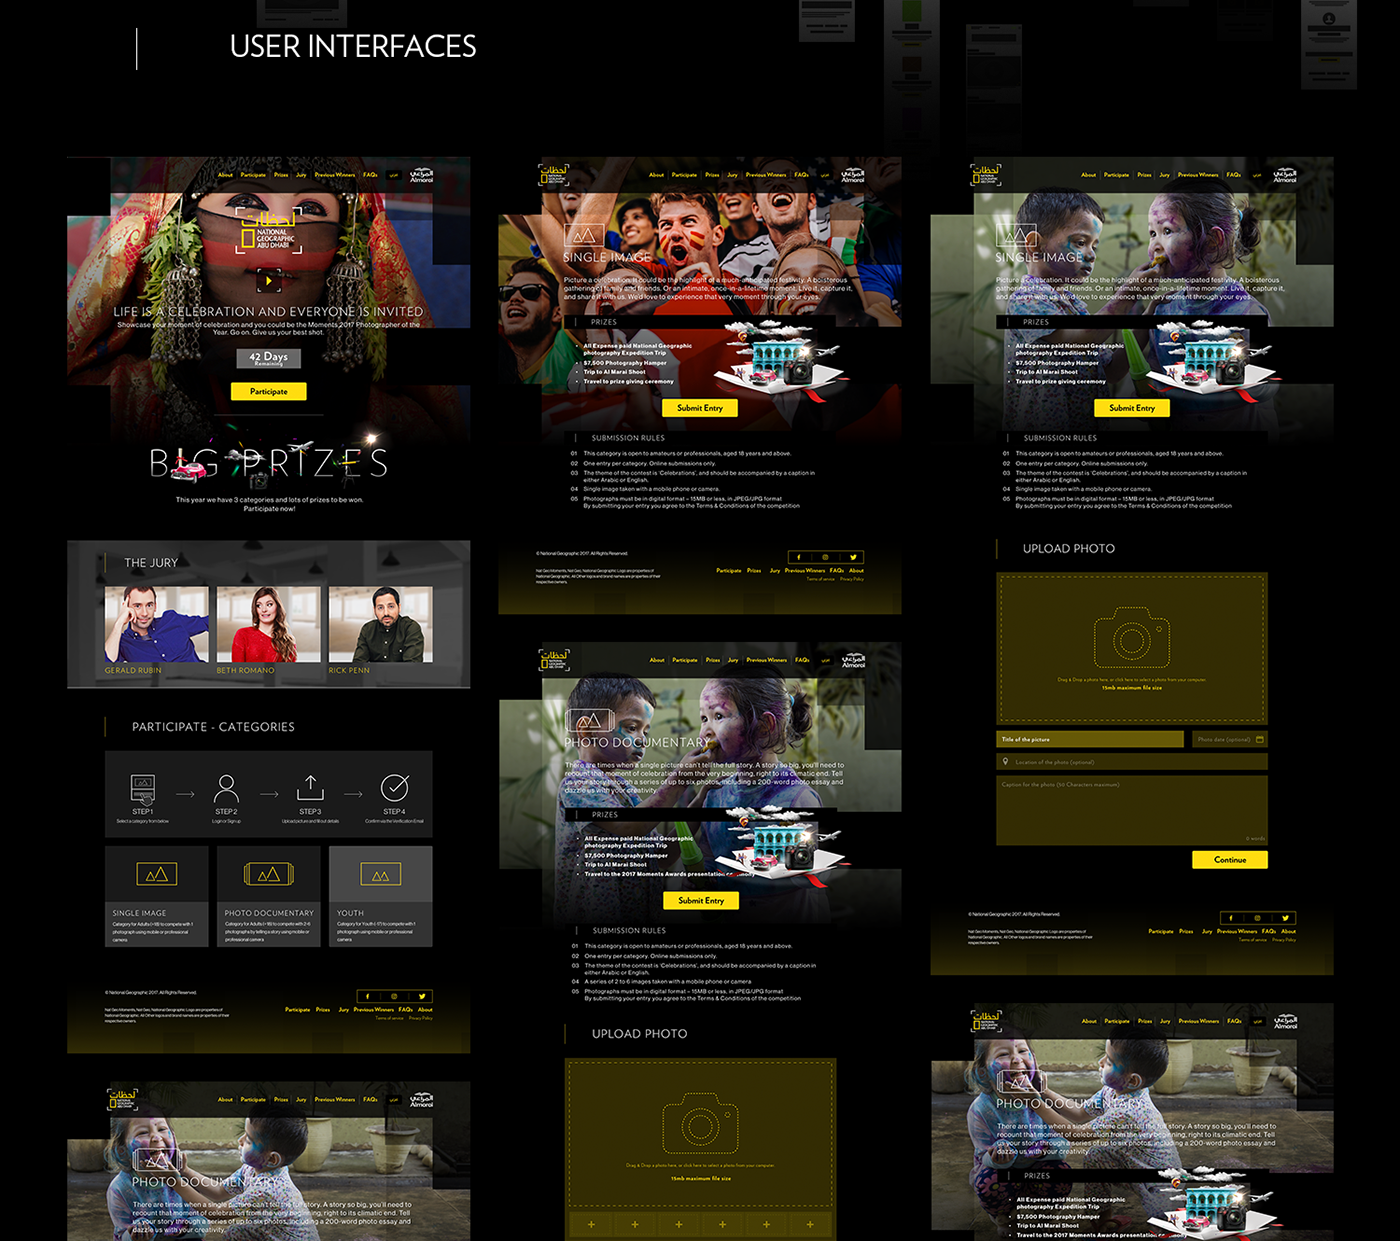 national geographic moments Photography  Competition Website user experience admin pane